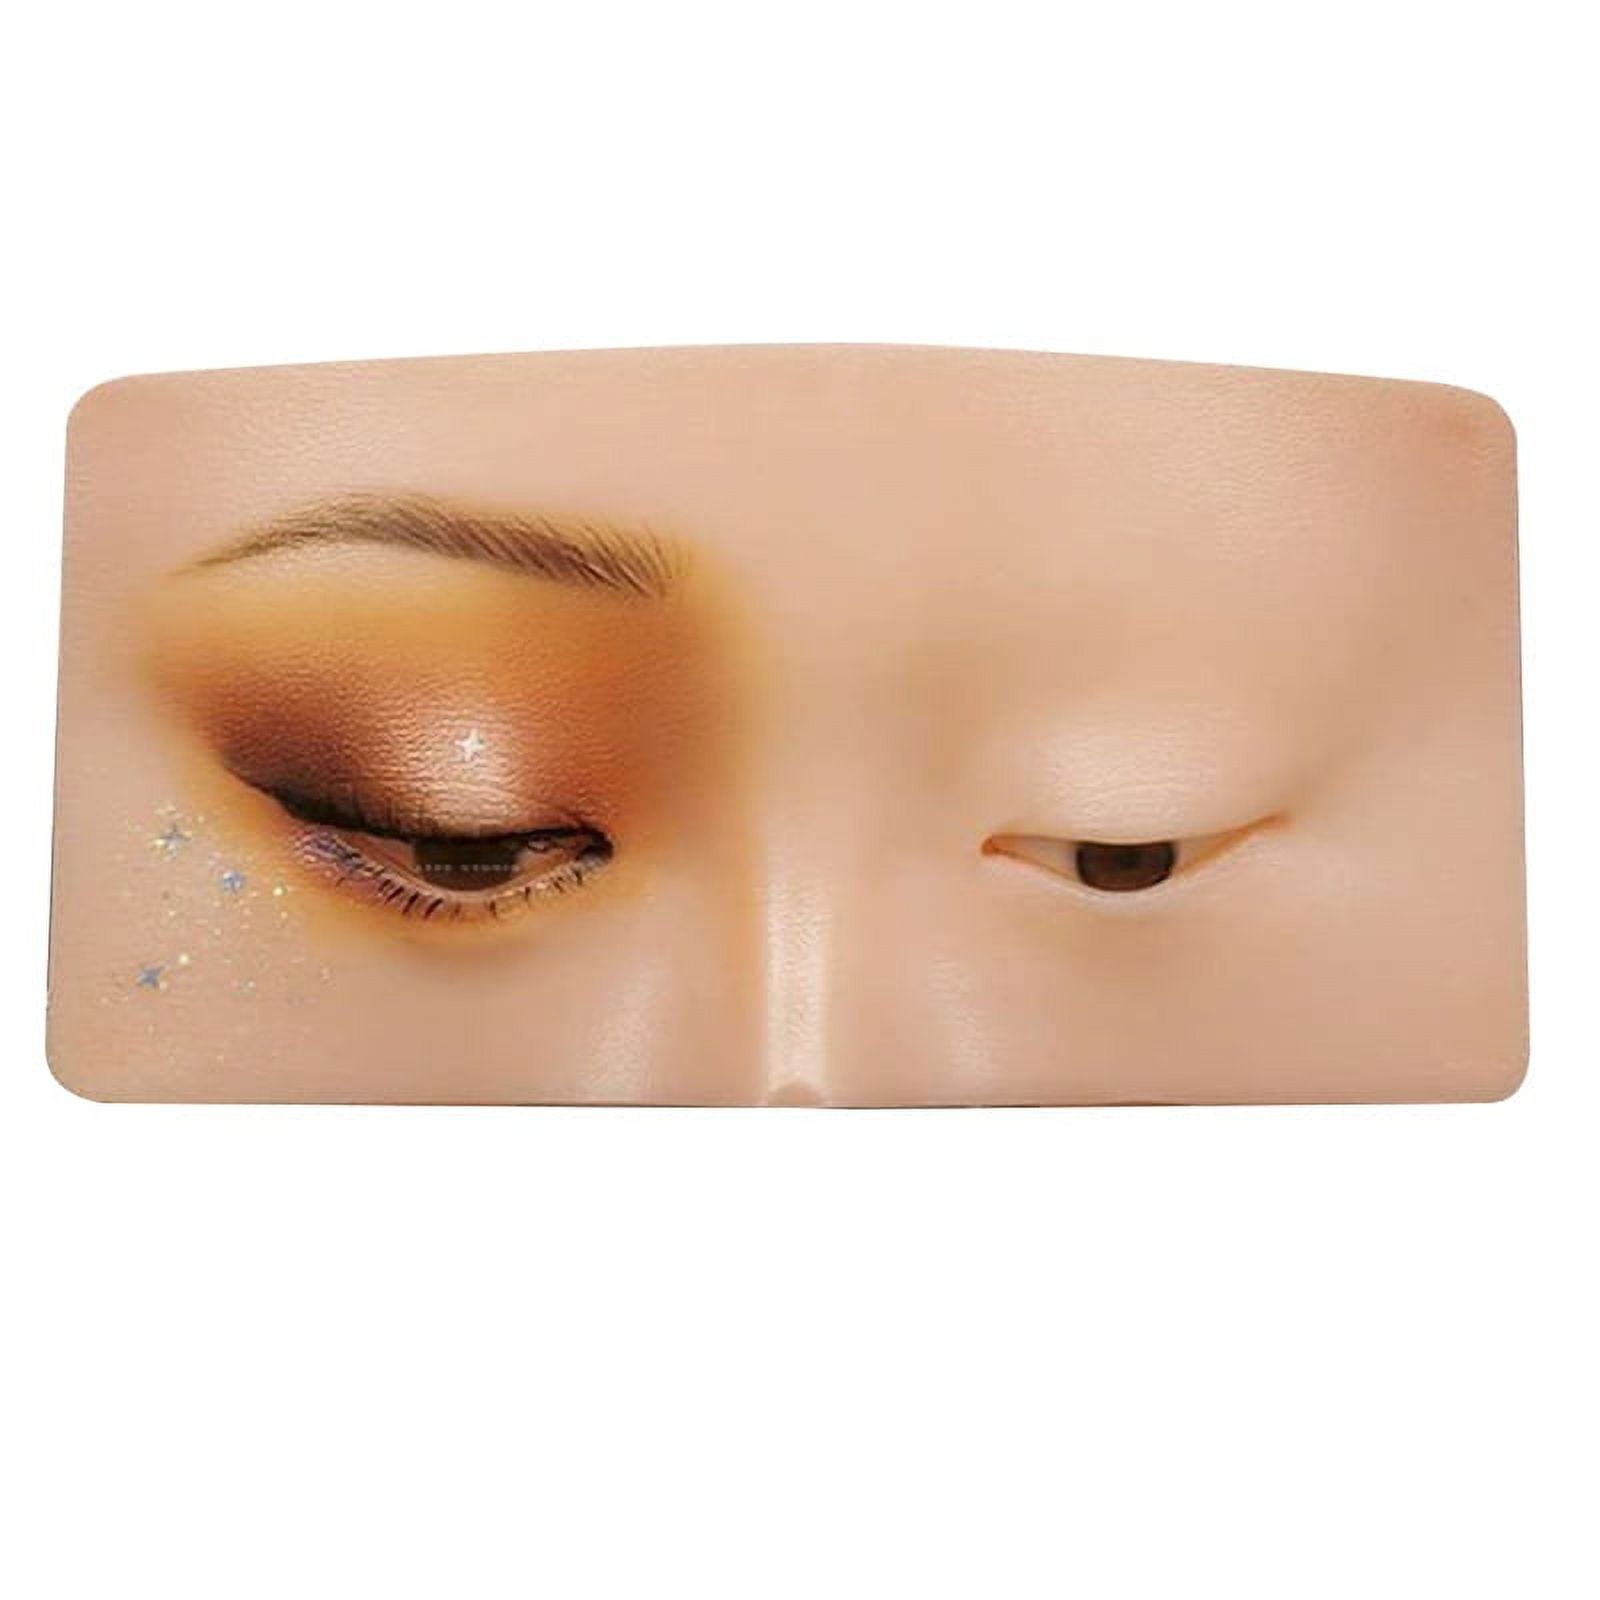  Makeup Practice Face Board, 3D Realistic Pad with Brush  Silicone Makeup Mannequin Face Makeup Artist Full Face Practice Eyelash Eye  Shadow 5D Silicone Makeup Face for Makeup Artist Board Makeup